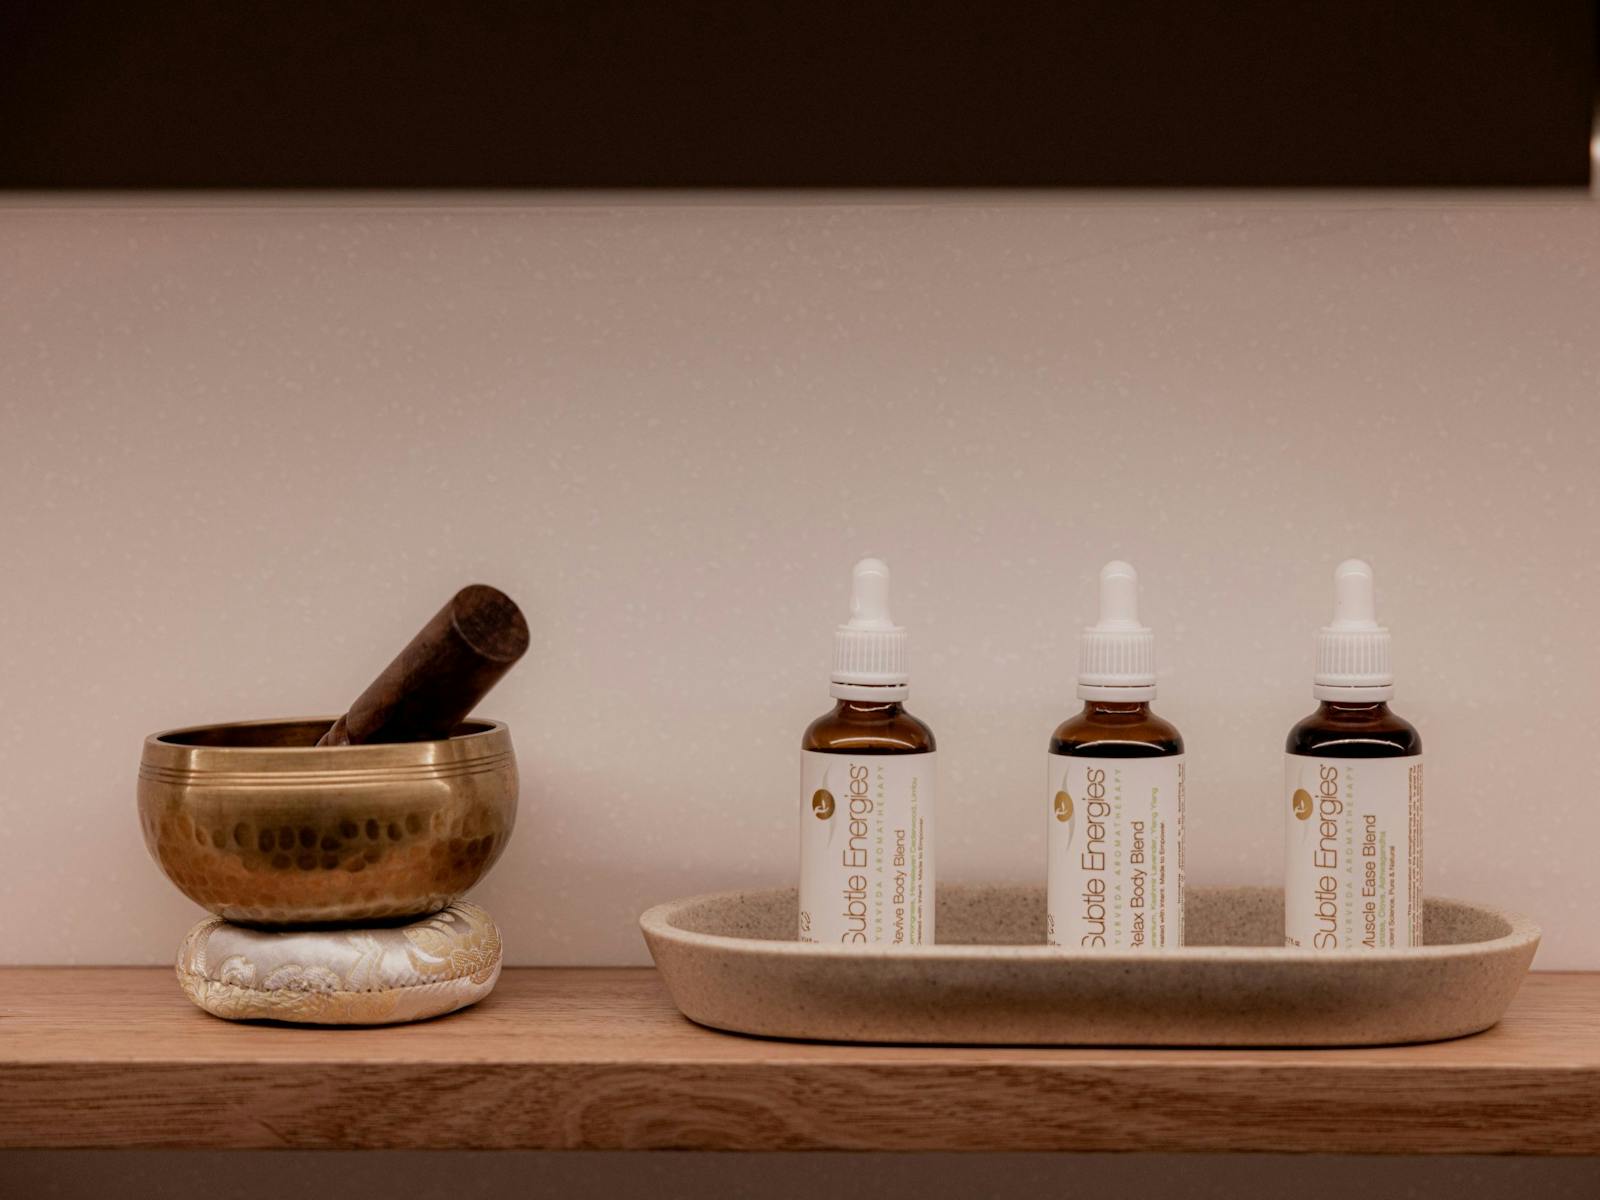 Subtle Energies products are the ultimate luxury in spa treatments